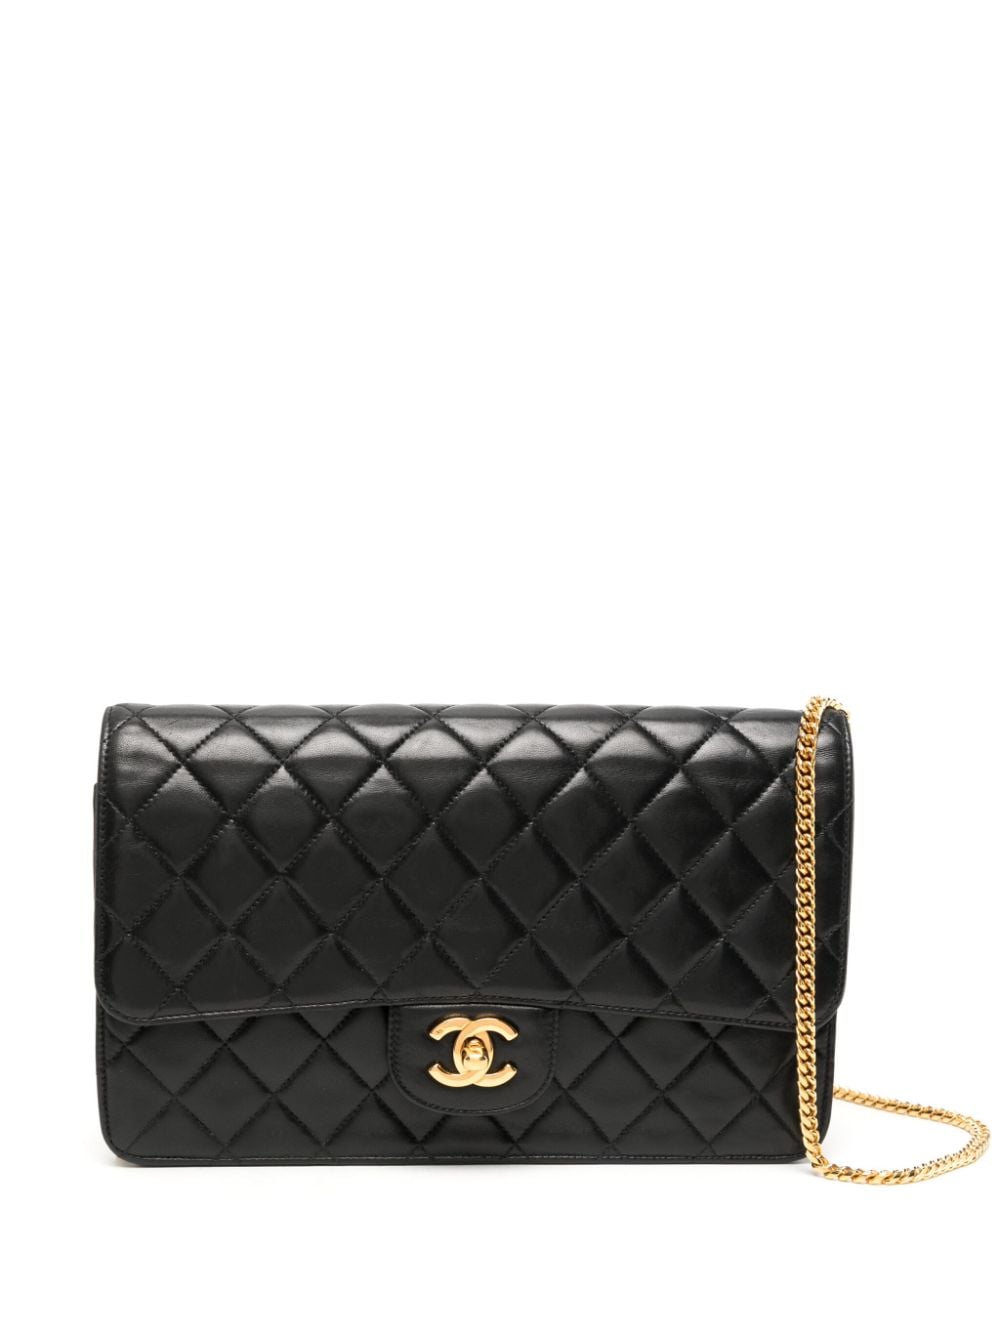 Chanel White Quilted Leather Vintage Full Flap Bag Chanel